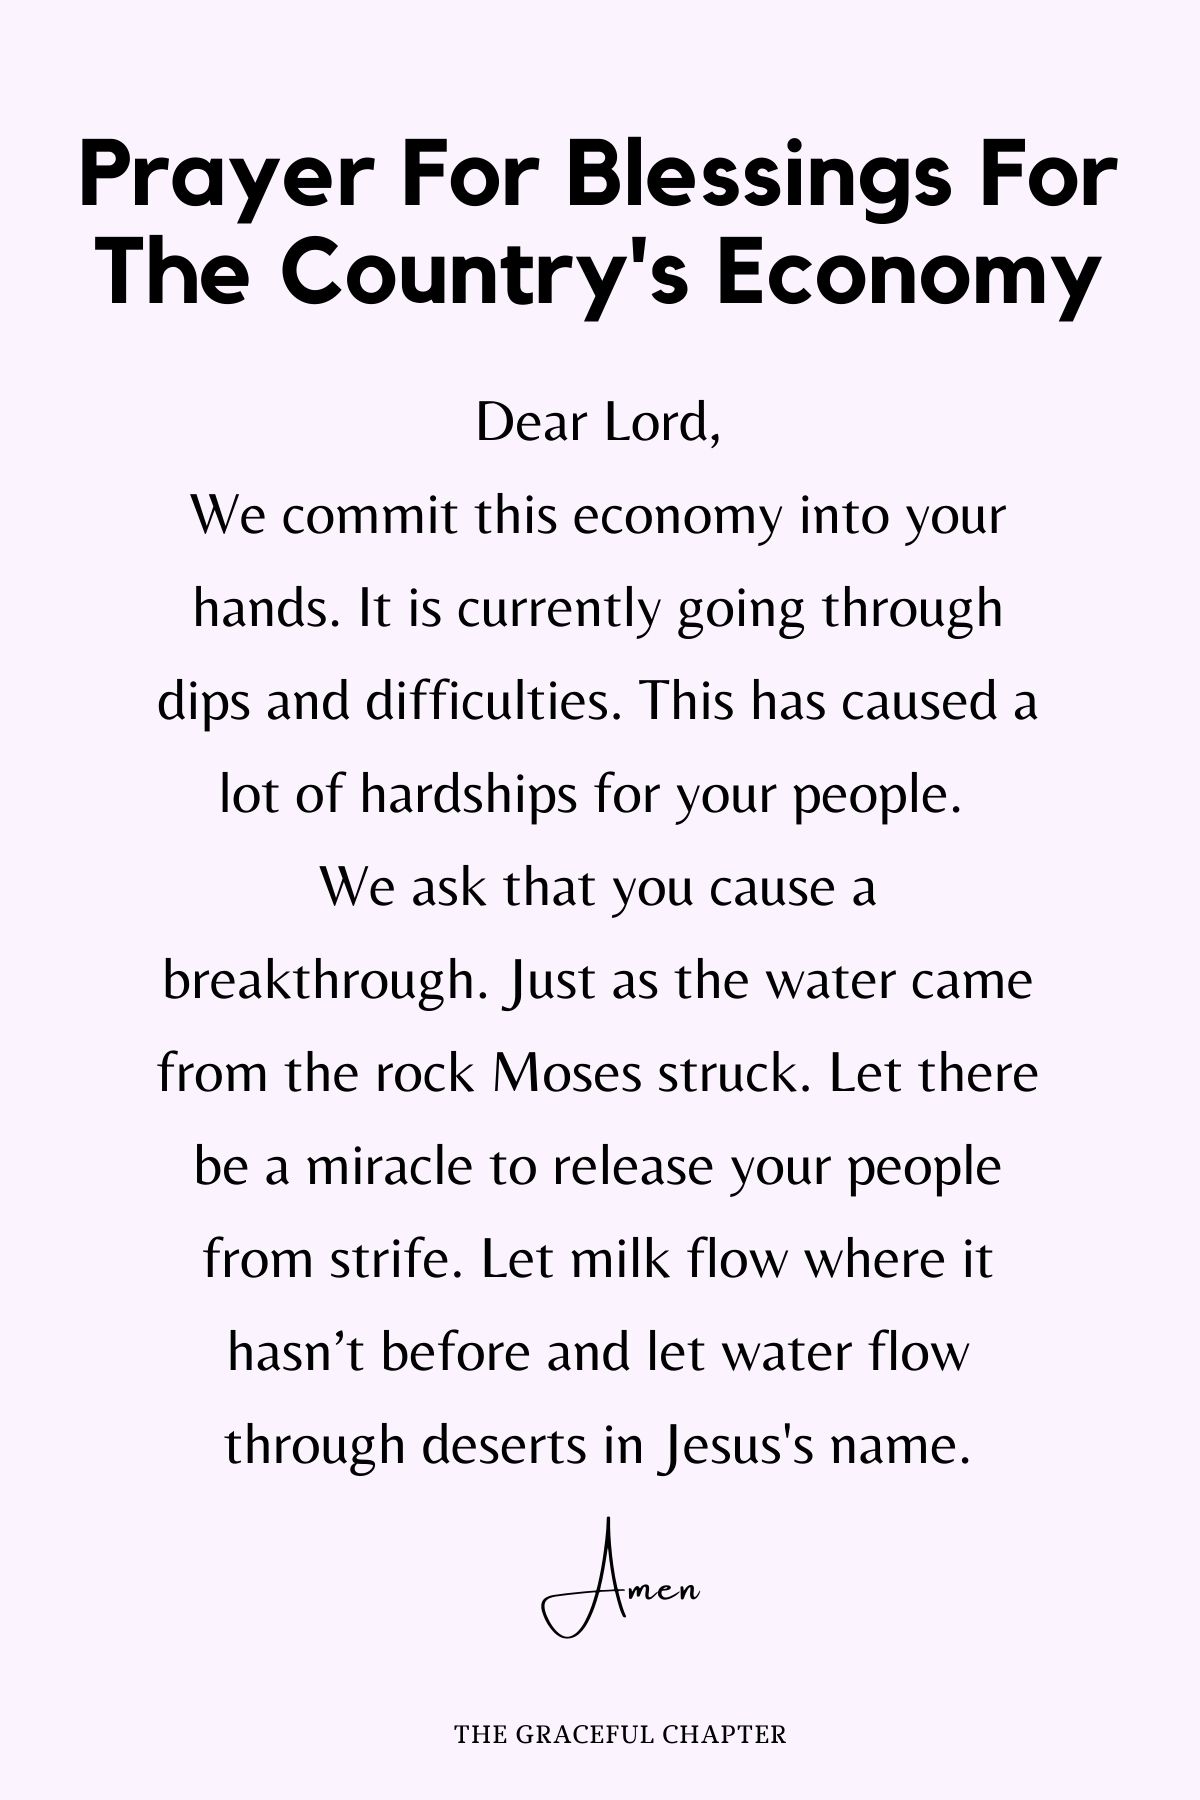 Prayer for blessings for the country's economy